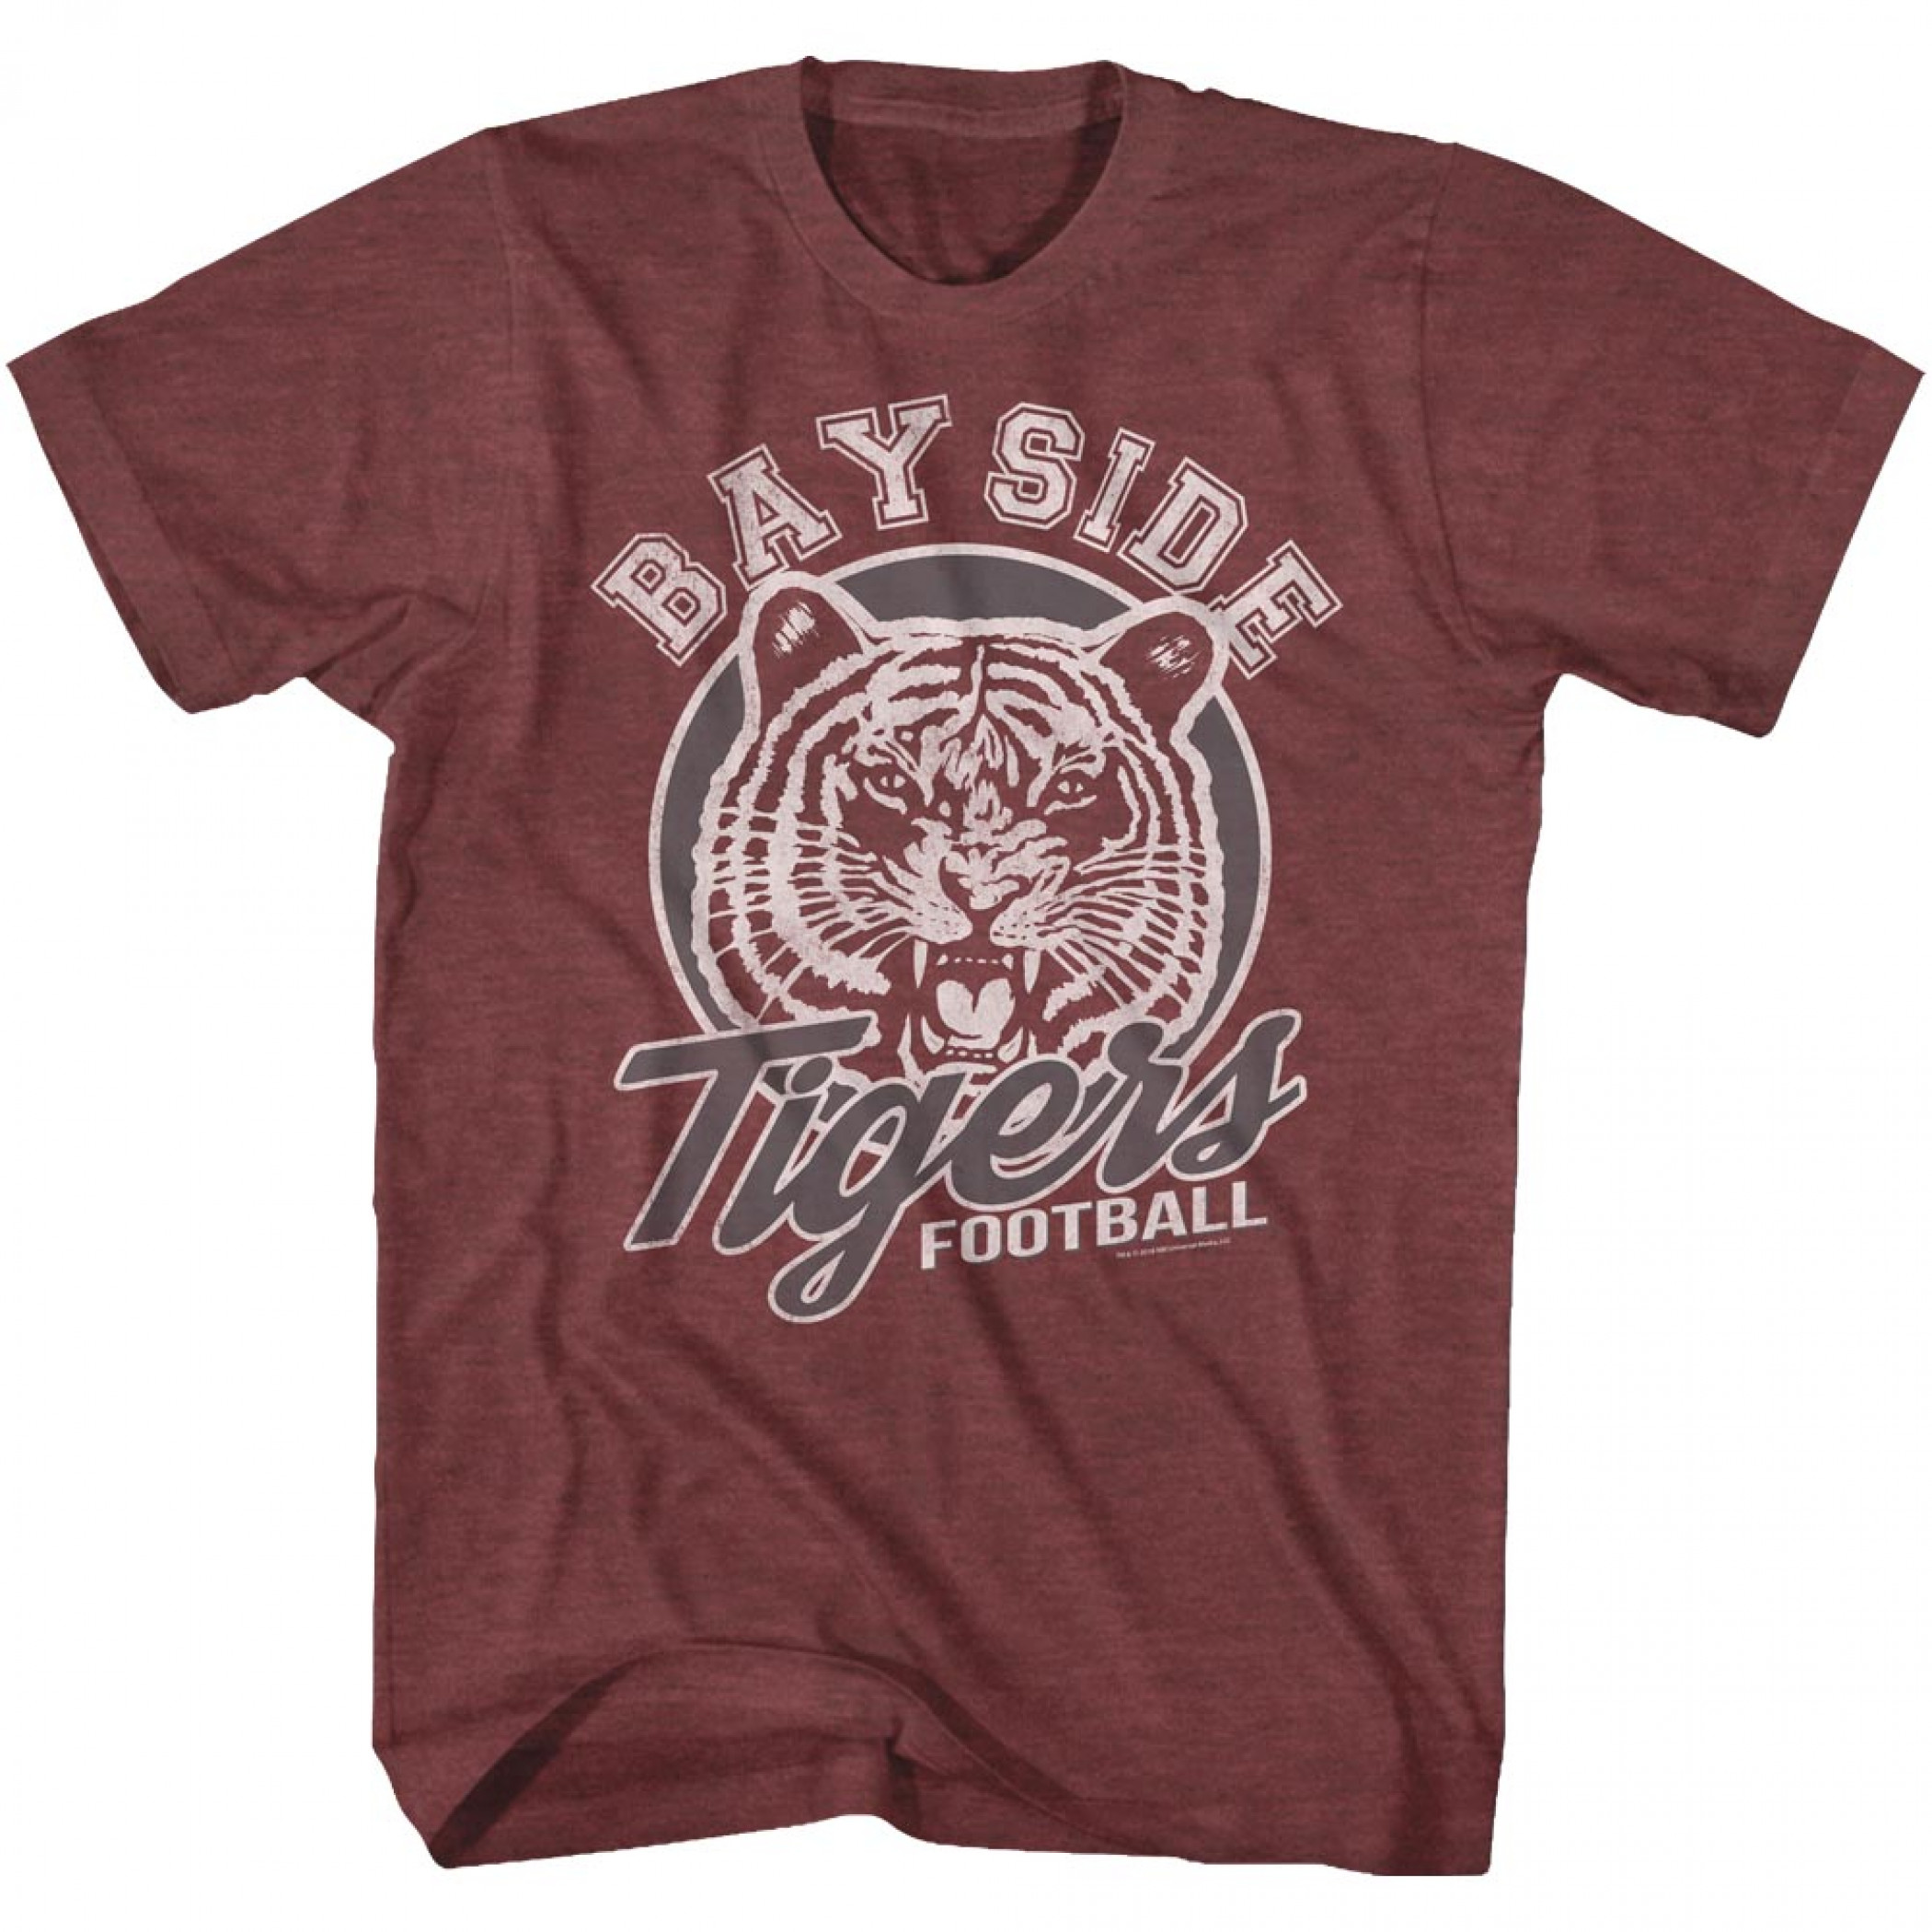 Saved By The Bell Bayside Tigers Football T-Shirt